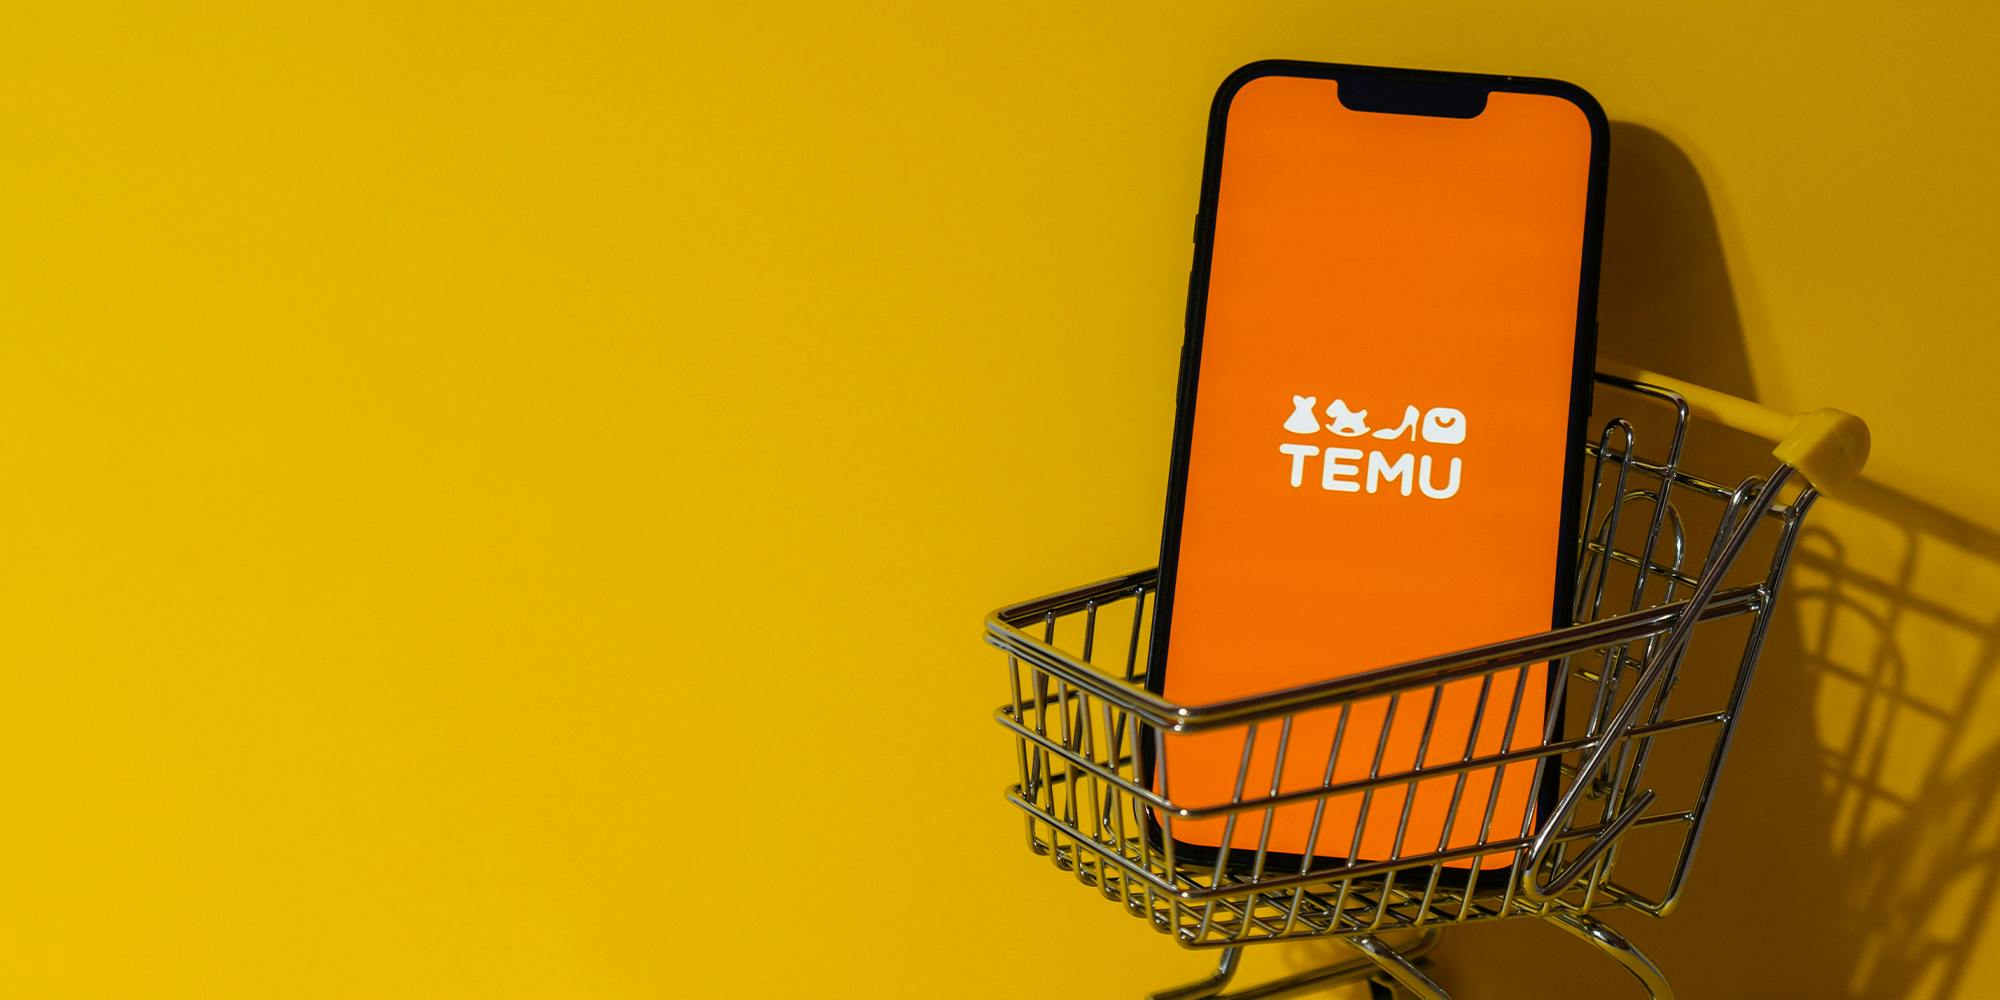 temu shopping cart image to illustrate why is temu so cheap explainer